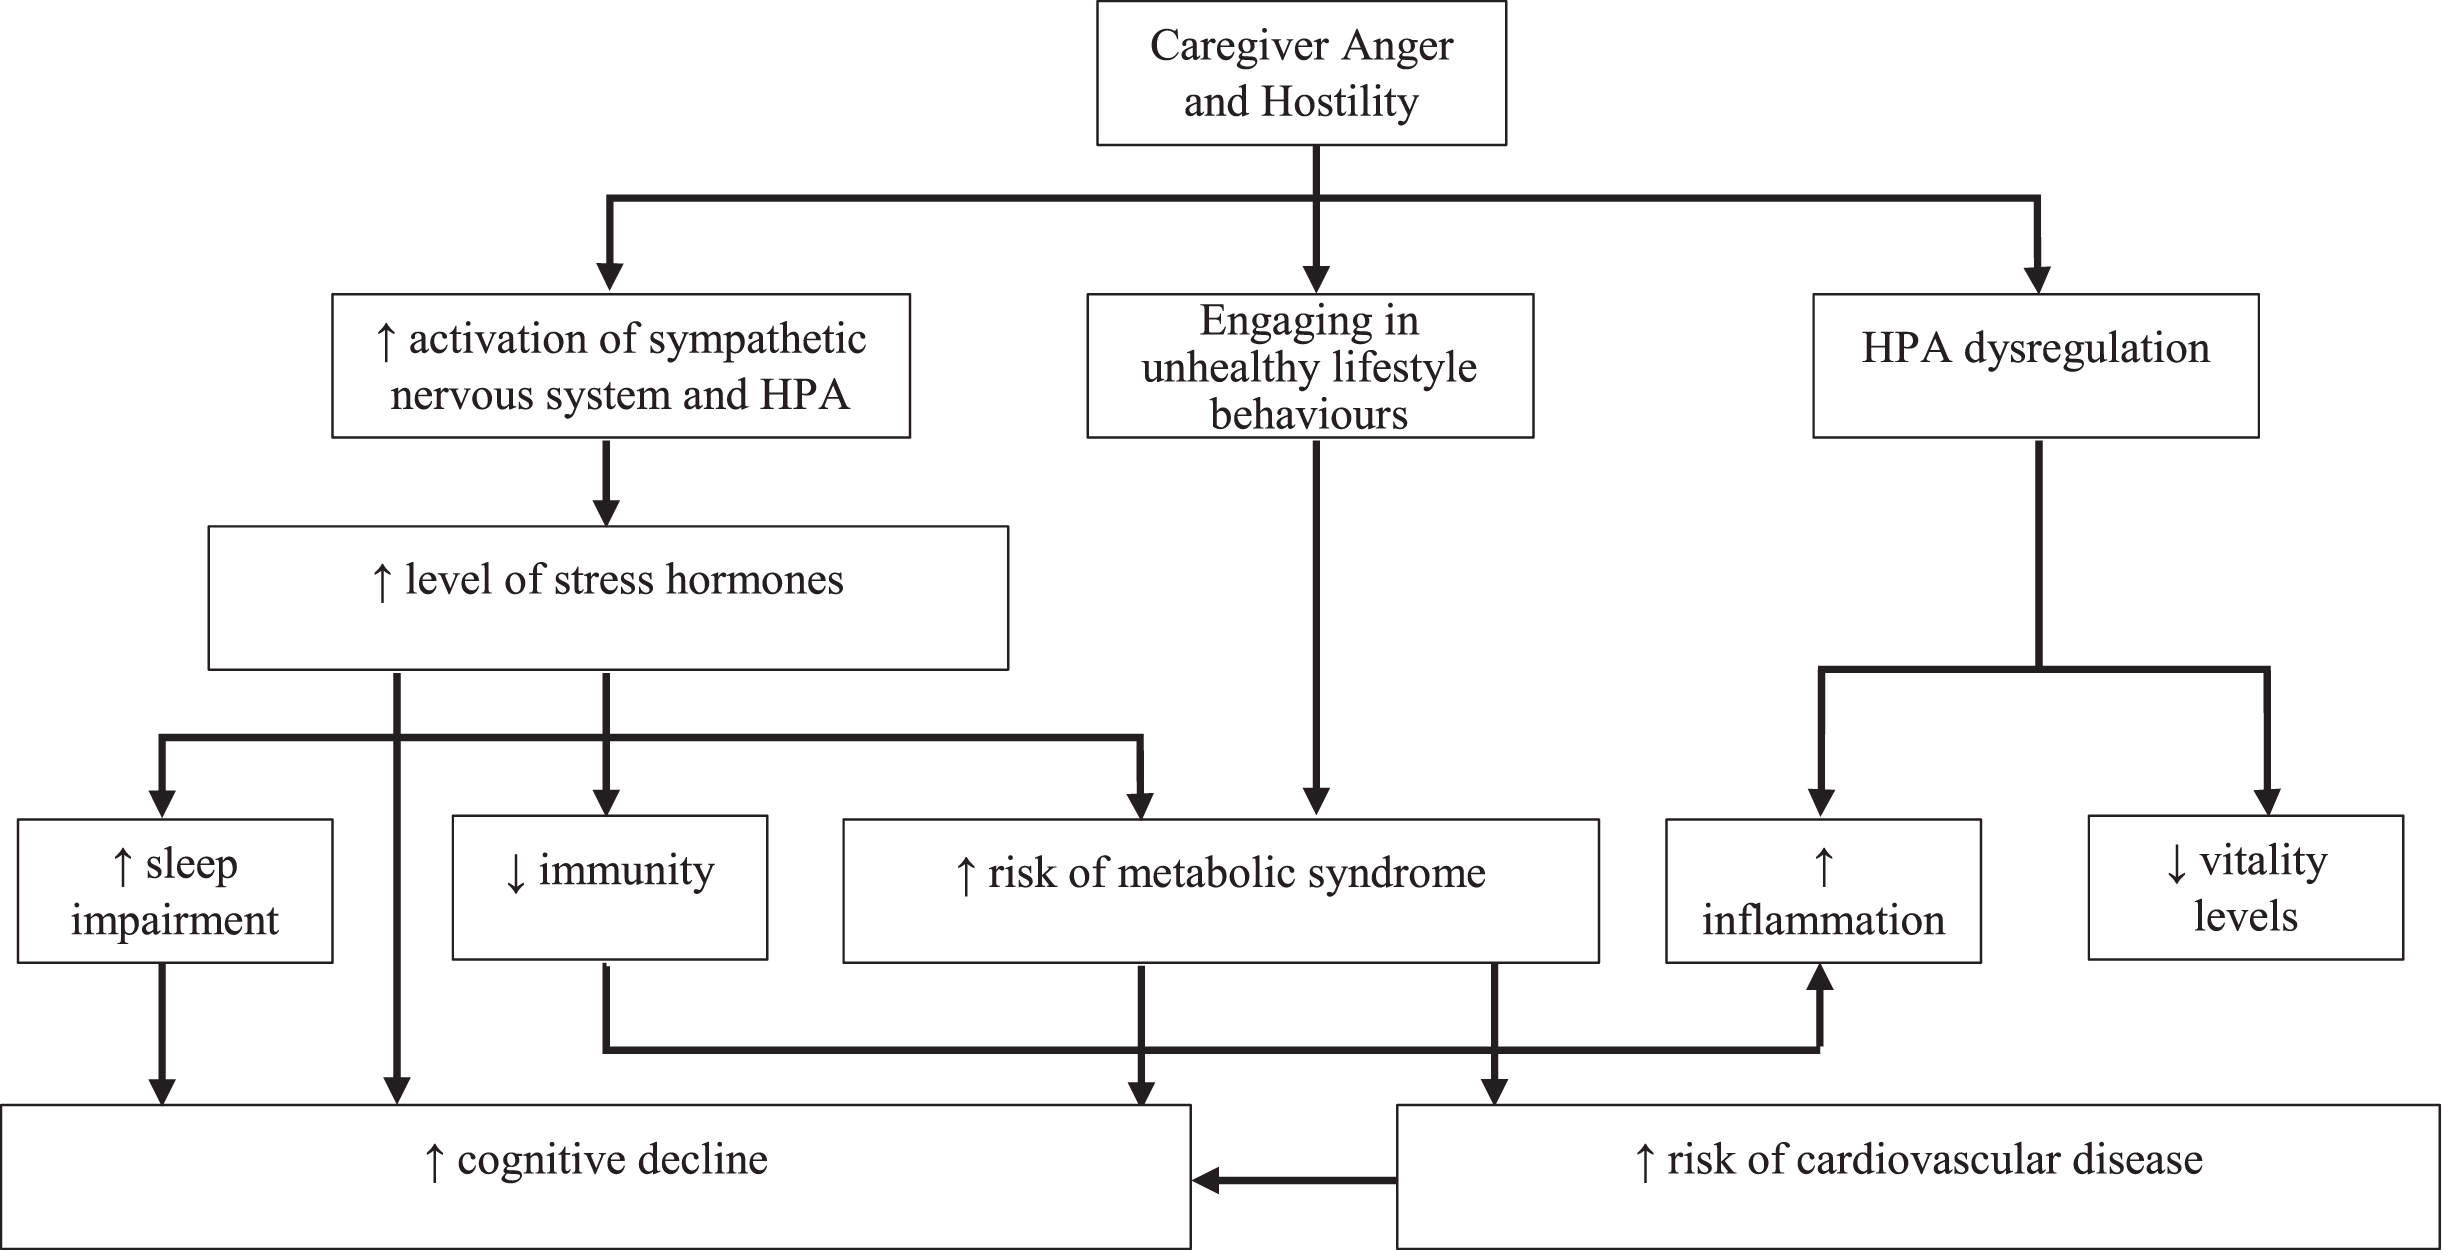 Mechanisms of caregiver anger and hostility and their link to physical illness in dementia caregivers. HPA, hypothalamic–pituitary–adrenal axis.